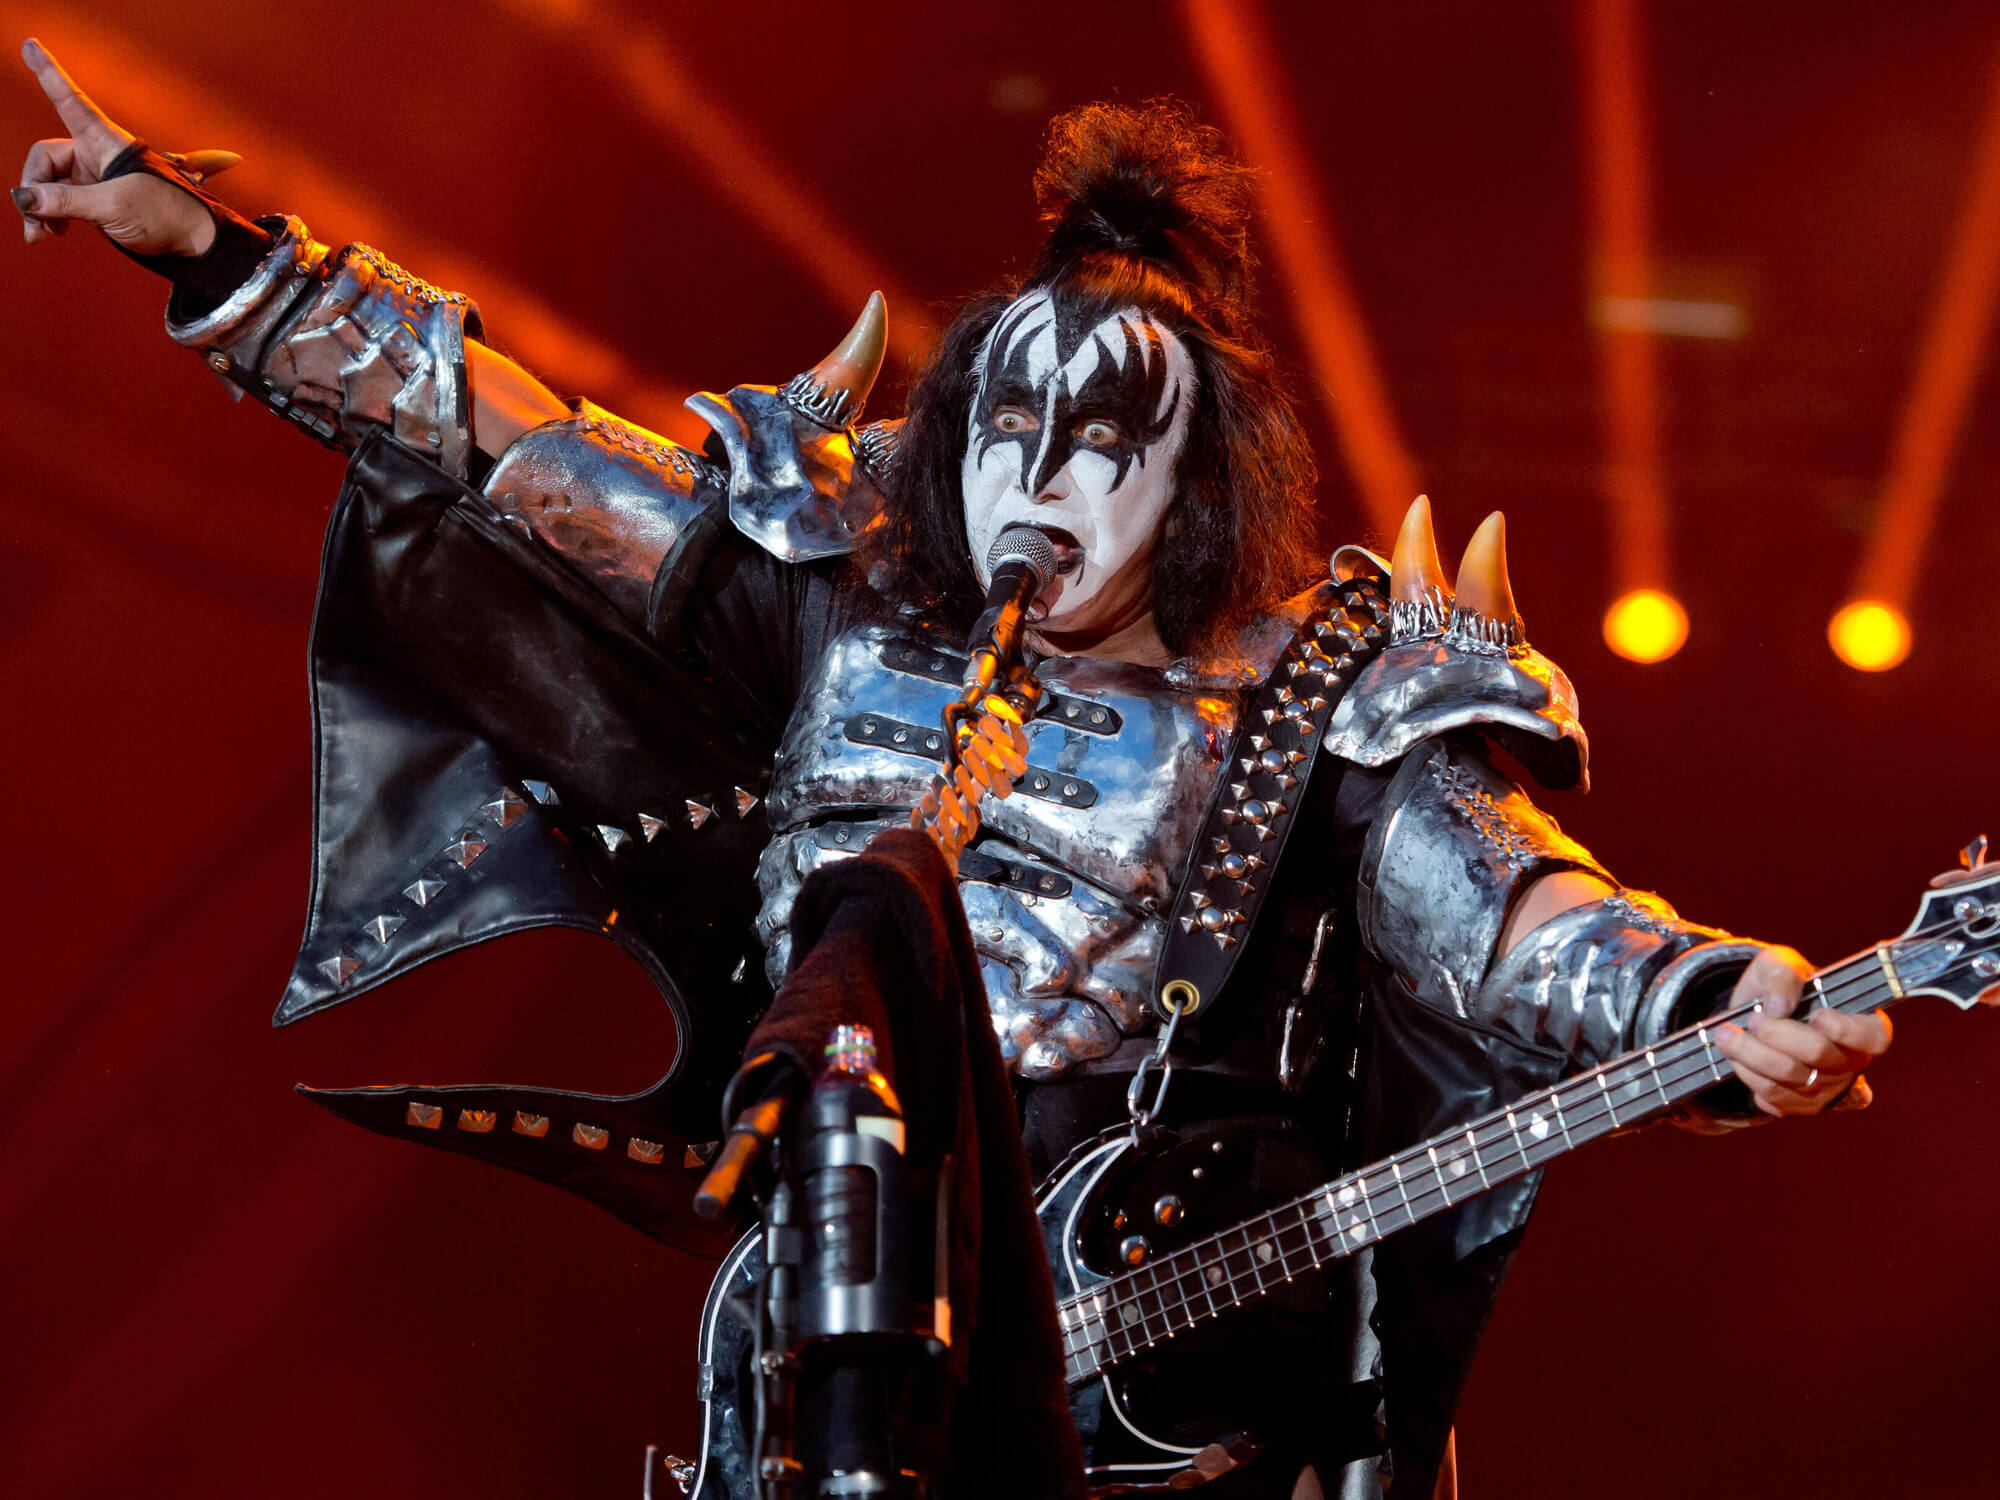 Gene Simmons says he doesn't have friends